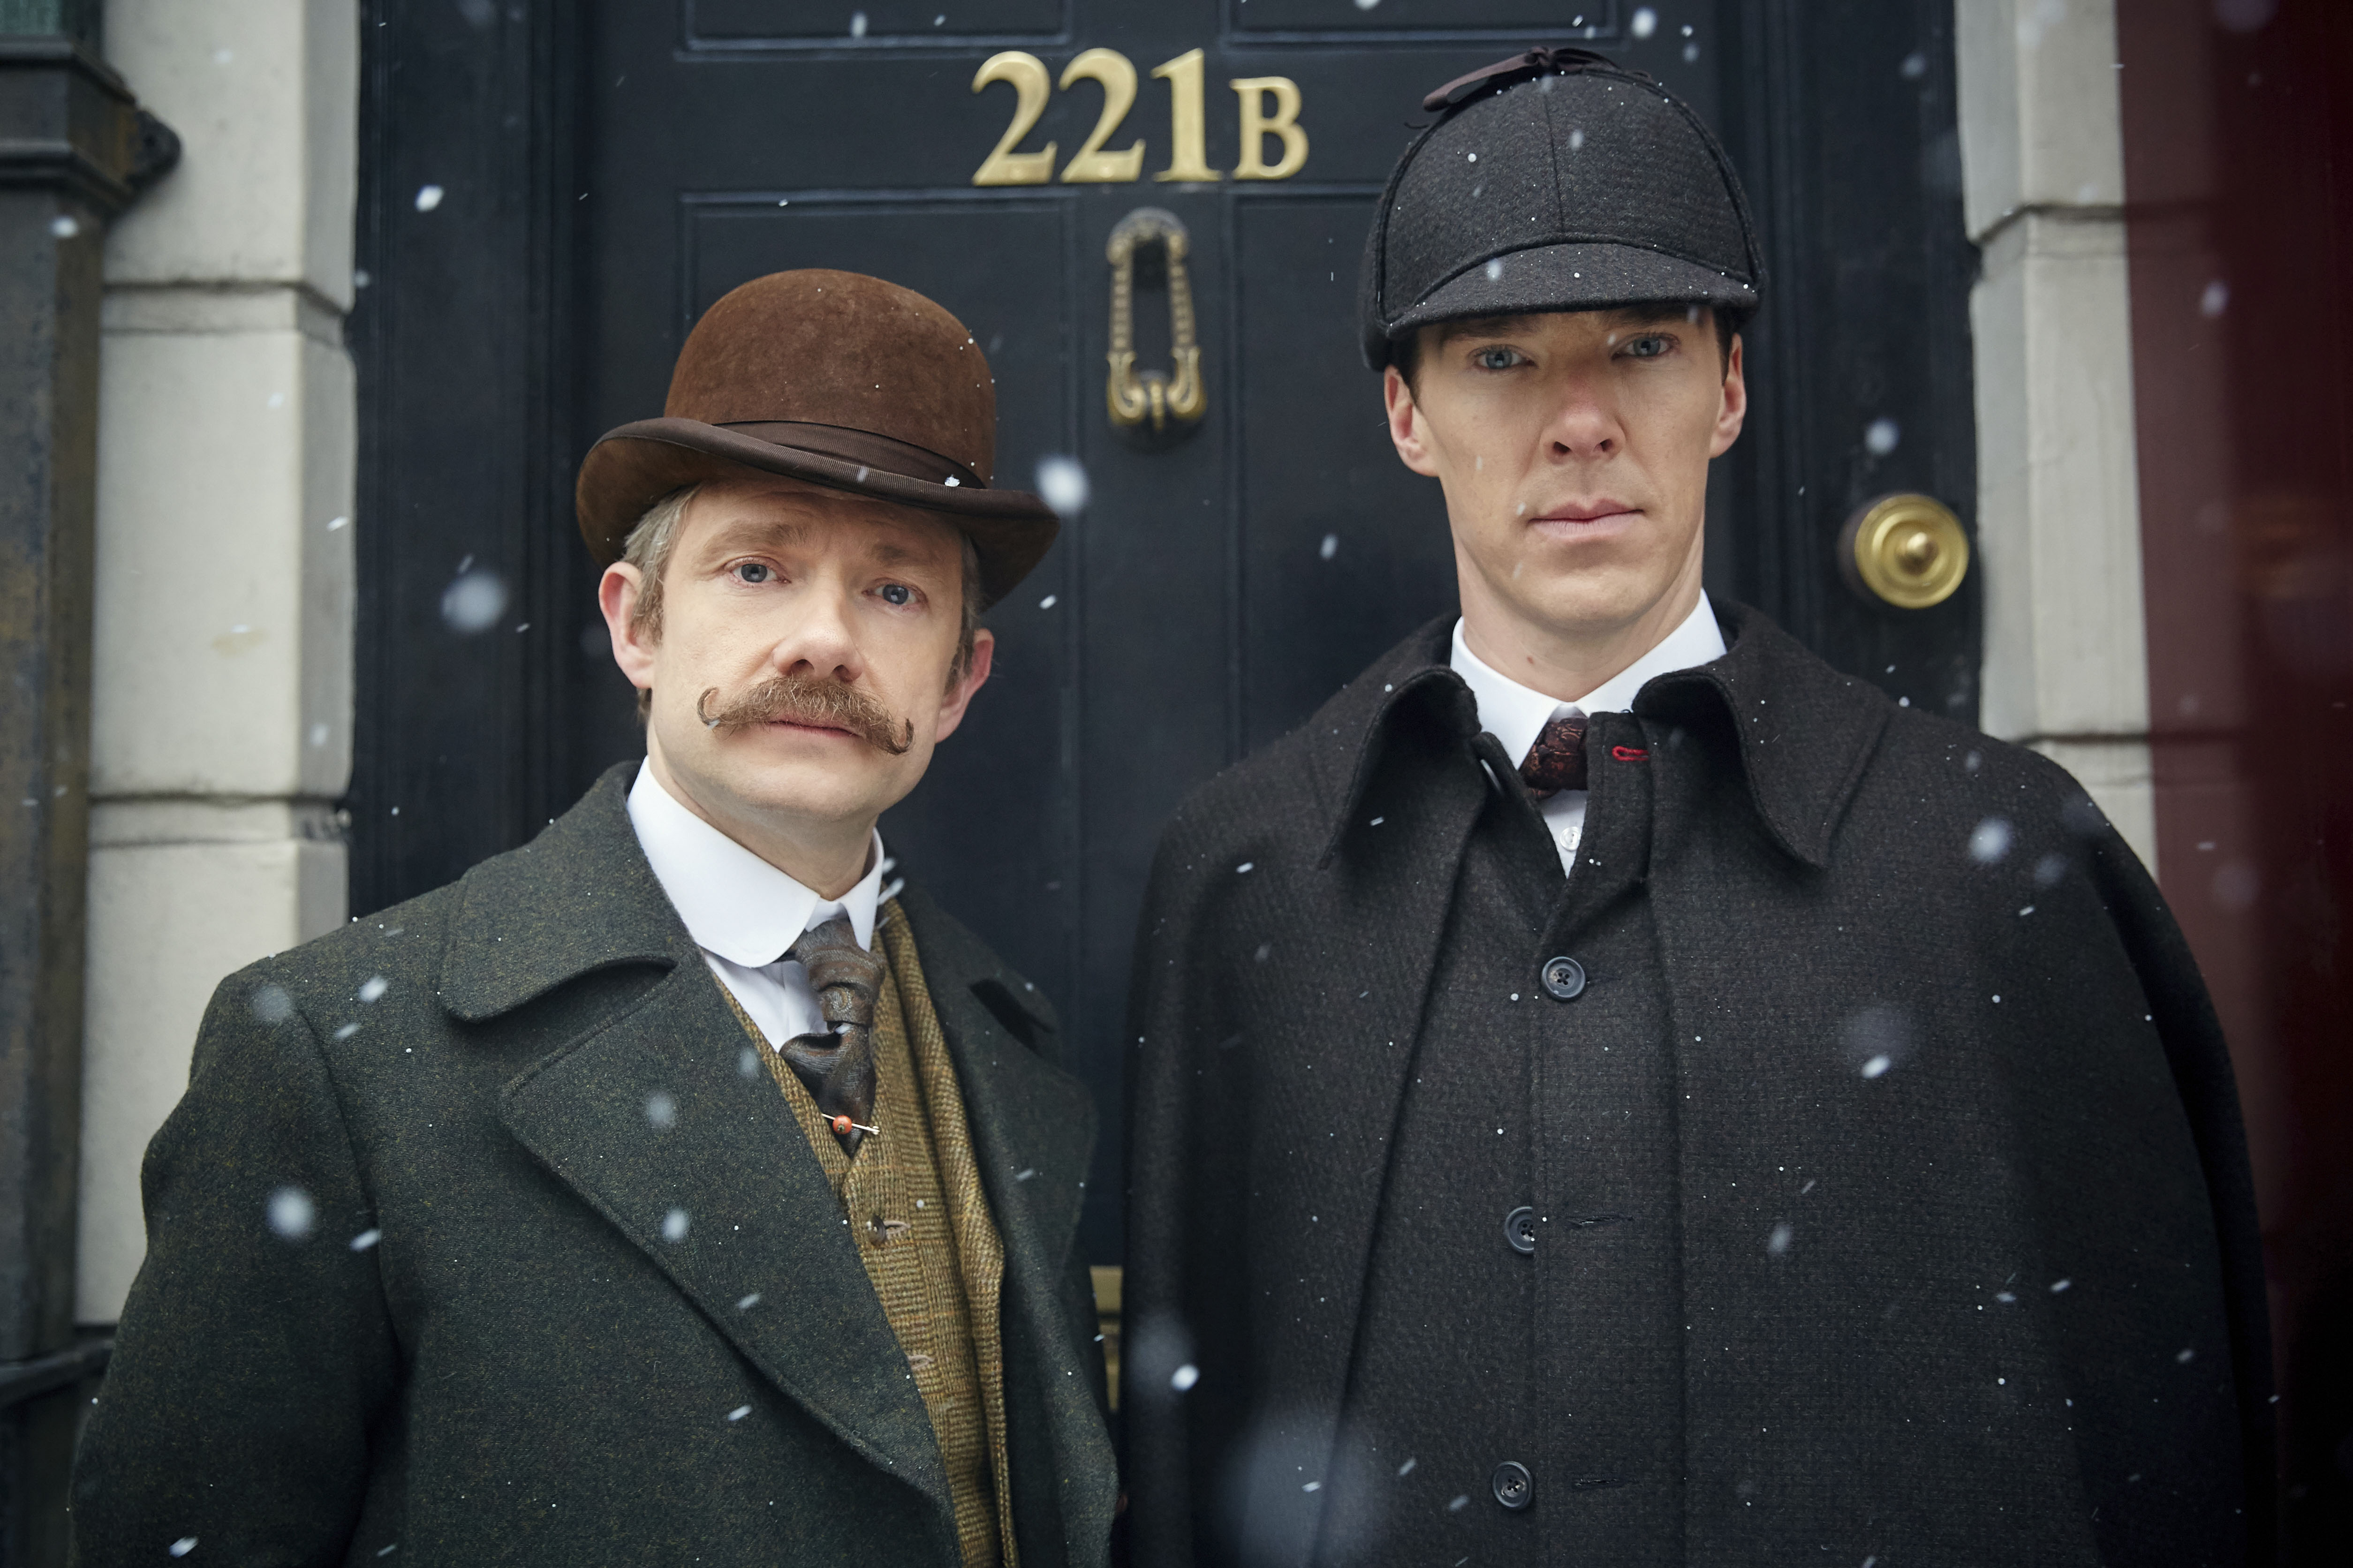 MASTERPIECE Sherlock: The Abominable Bride Benedict Cumberbatch (The Imitation Game) and Martin Freeman (The Hobbit) return as Sherlock Holmes and Dr. Watson in the acclaimed modern retelling of Arthur Conan Doyle's classic stories. But now our heroes find themselves in 1890s London. Beloved characters Mary Morstan (played by Amanda Abbington), Inspector Lestrade (Rupert Graves) and Mrs. Hudson (Una Stubbs) also turn up at 221b Baker Street. Sherlock: The Abominable Bride is a 90-minute Sherlock Special. Picture Shows: Dr. John Watson (MARTIN FREEMAN), Sherlock Holmes (BENEDICT CUMBERBATCH) © Robert Viglasky/Hartswood Films and BBC Wales for BBC One and MASTERPIECE This image may be used only in the direct promotion of MASTERPIECE. No other rights are granted. All rights are reserved. Editorial use only.